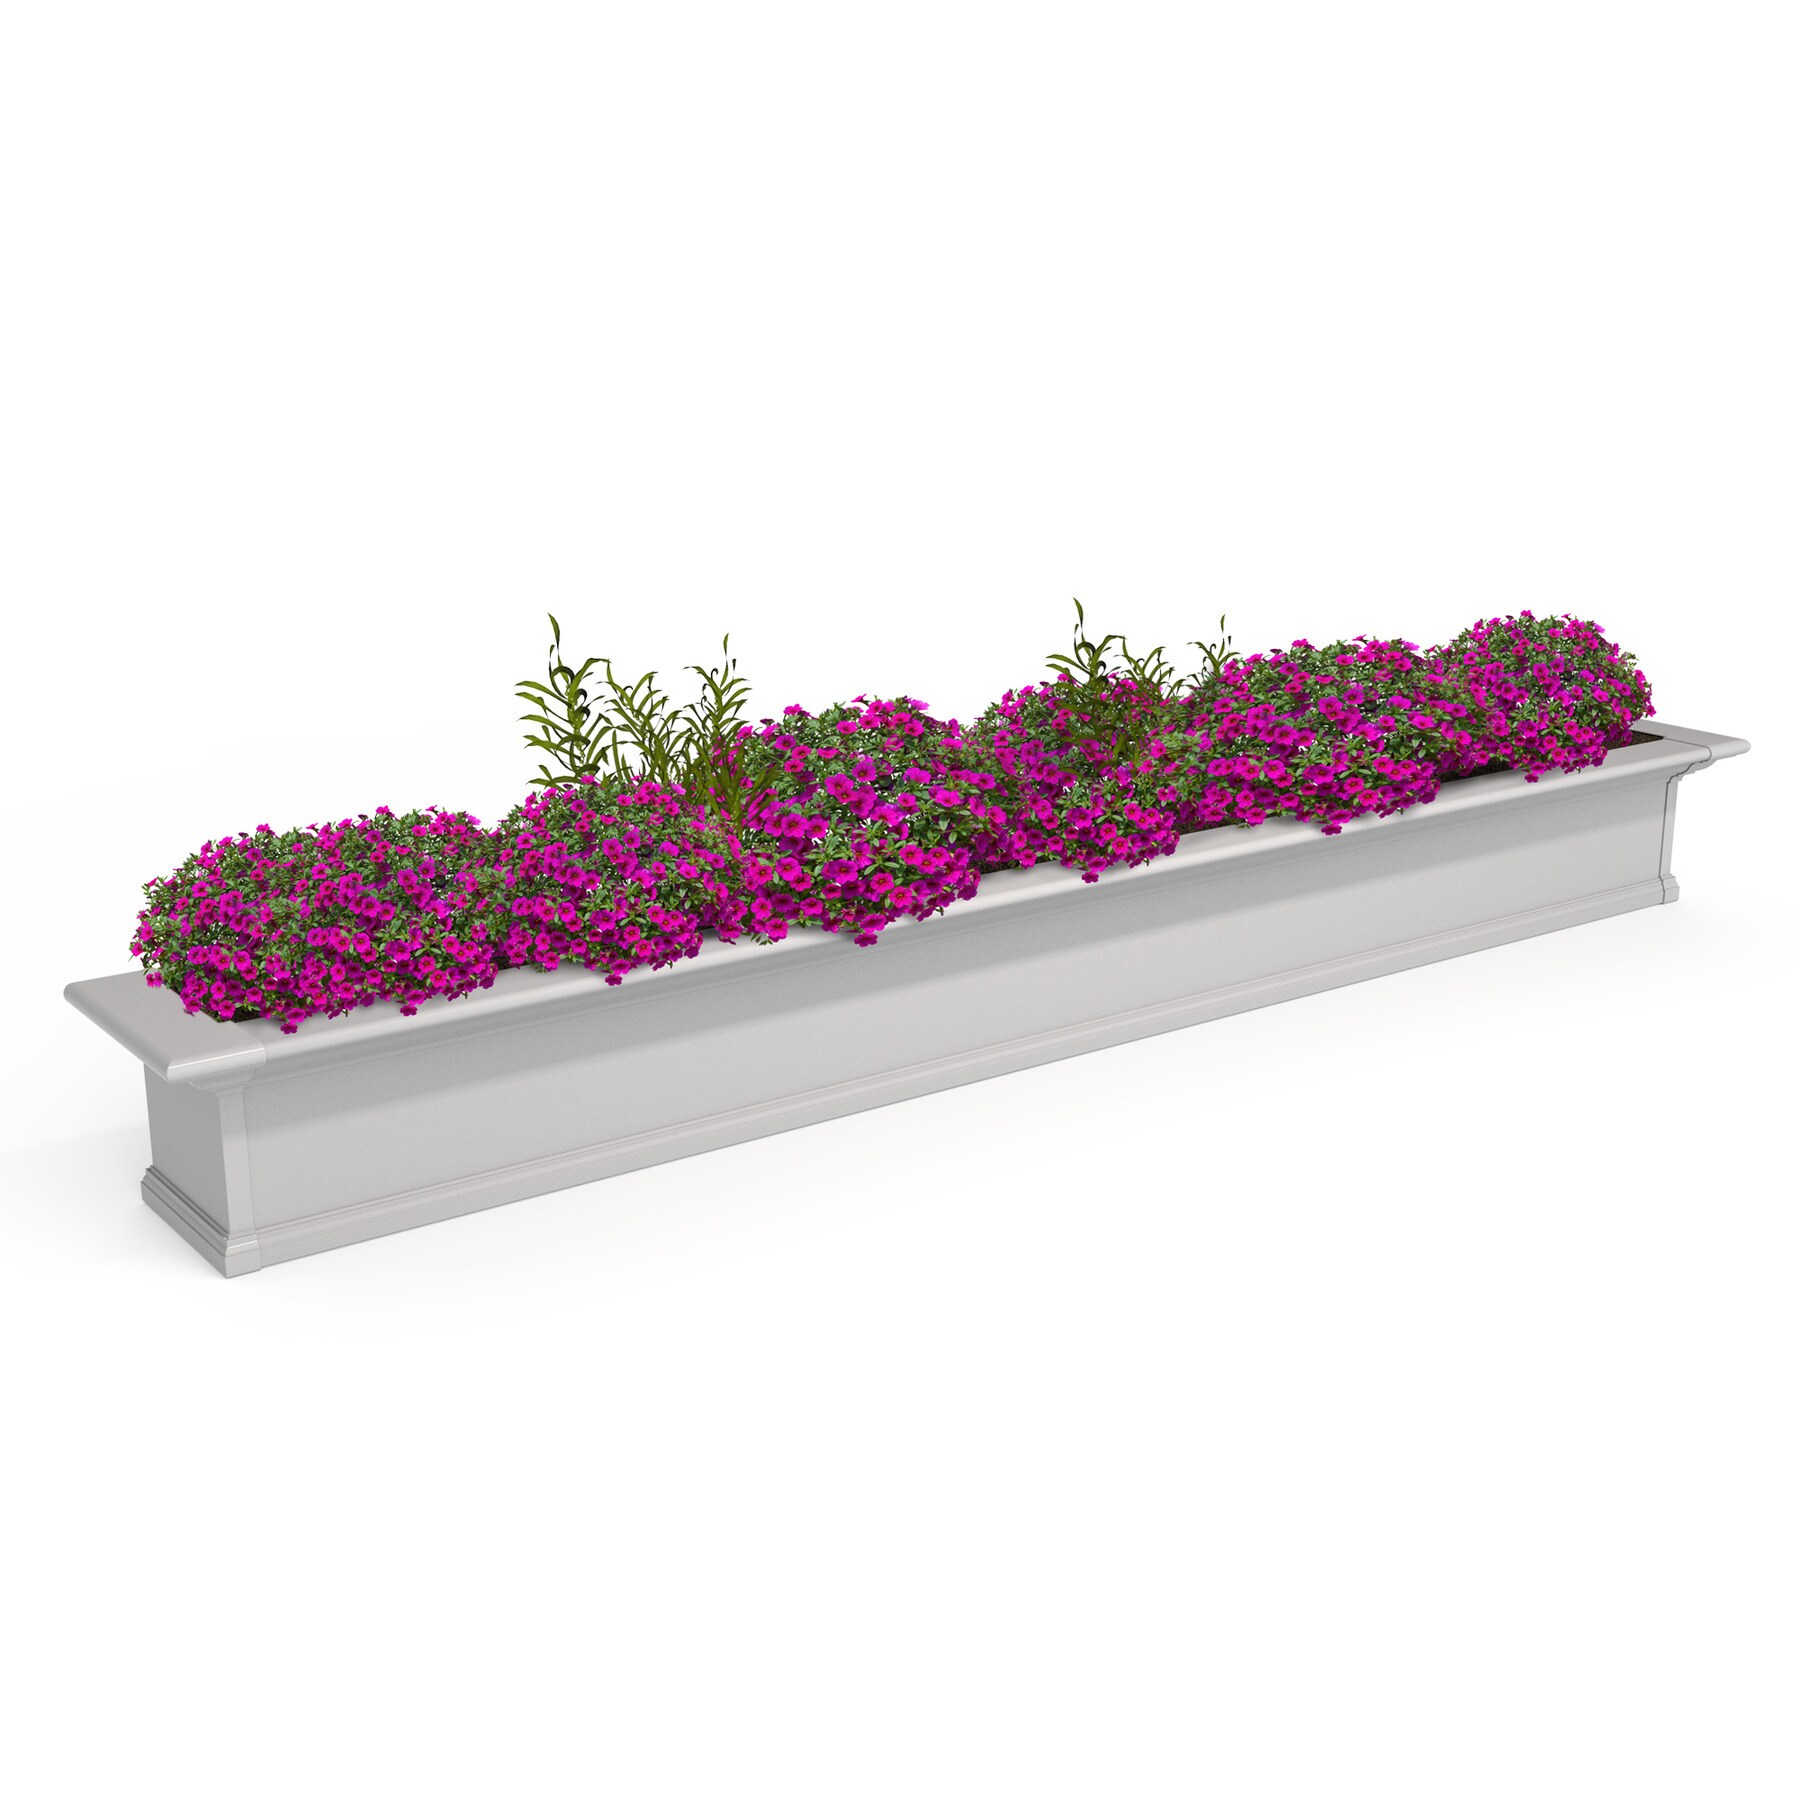 Mayne 96-in W x 10-in H White PVC Vinyl Traditional Outdoor Window Box ...